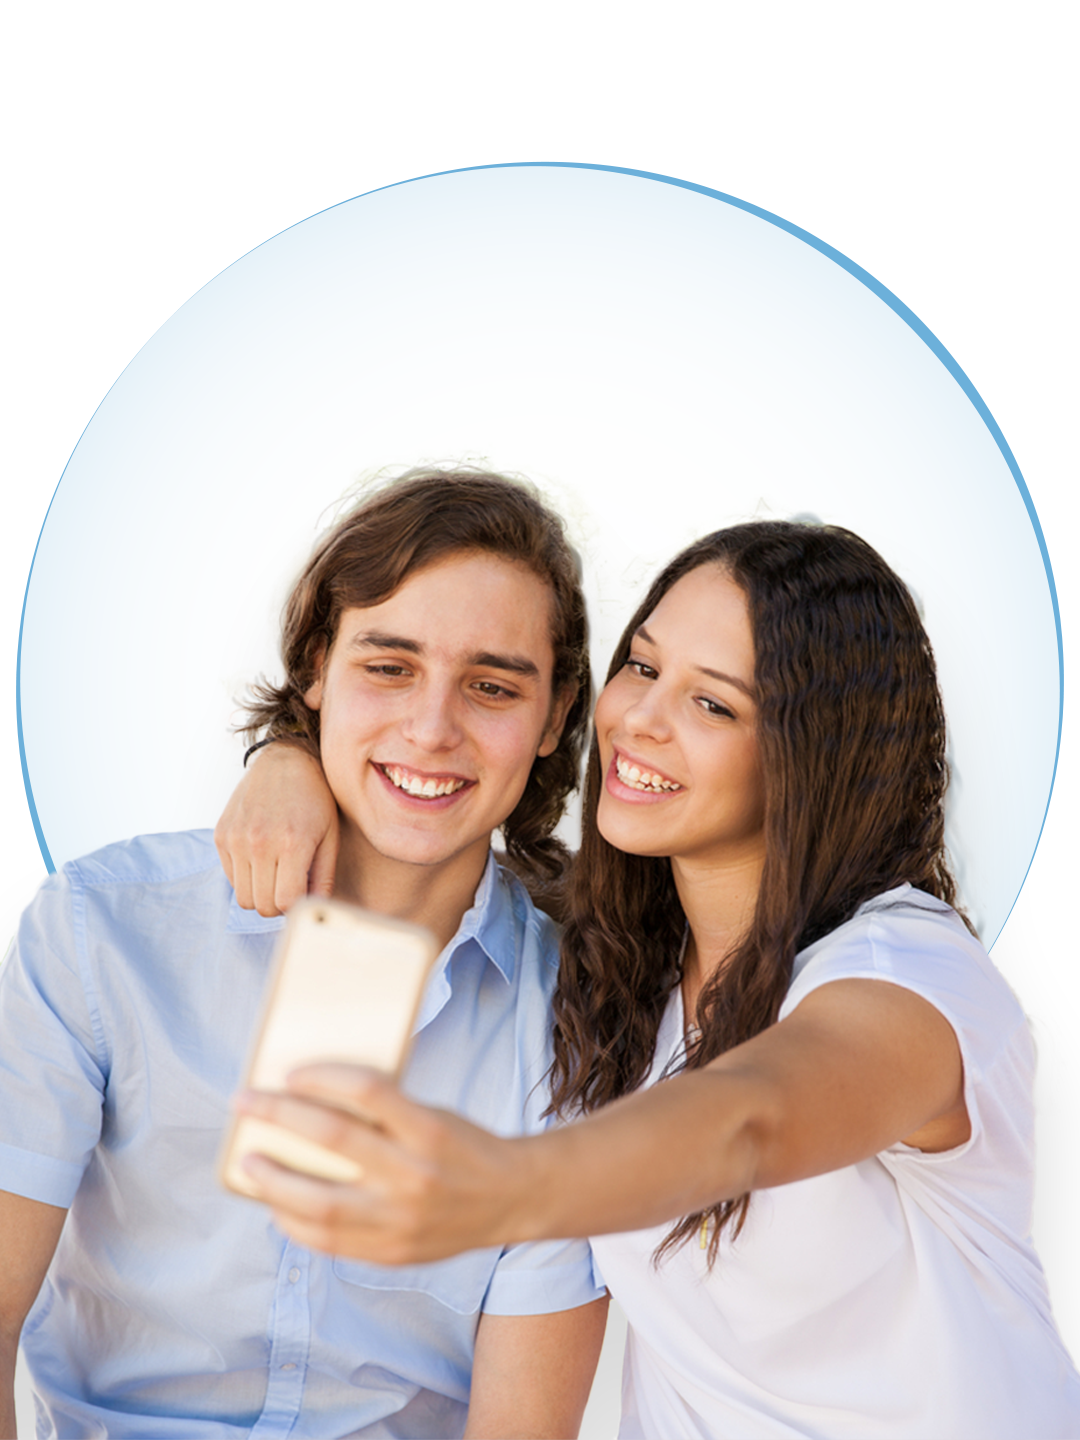 Smiling teenagers taking a selfie with the cellphone she is holding. Teenagers taking a selfie, he wearing a short-sleeved blue shirt with shoulder-length hair, and she wearing a white t-shirt.